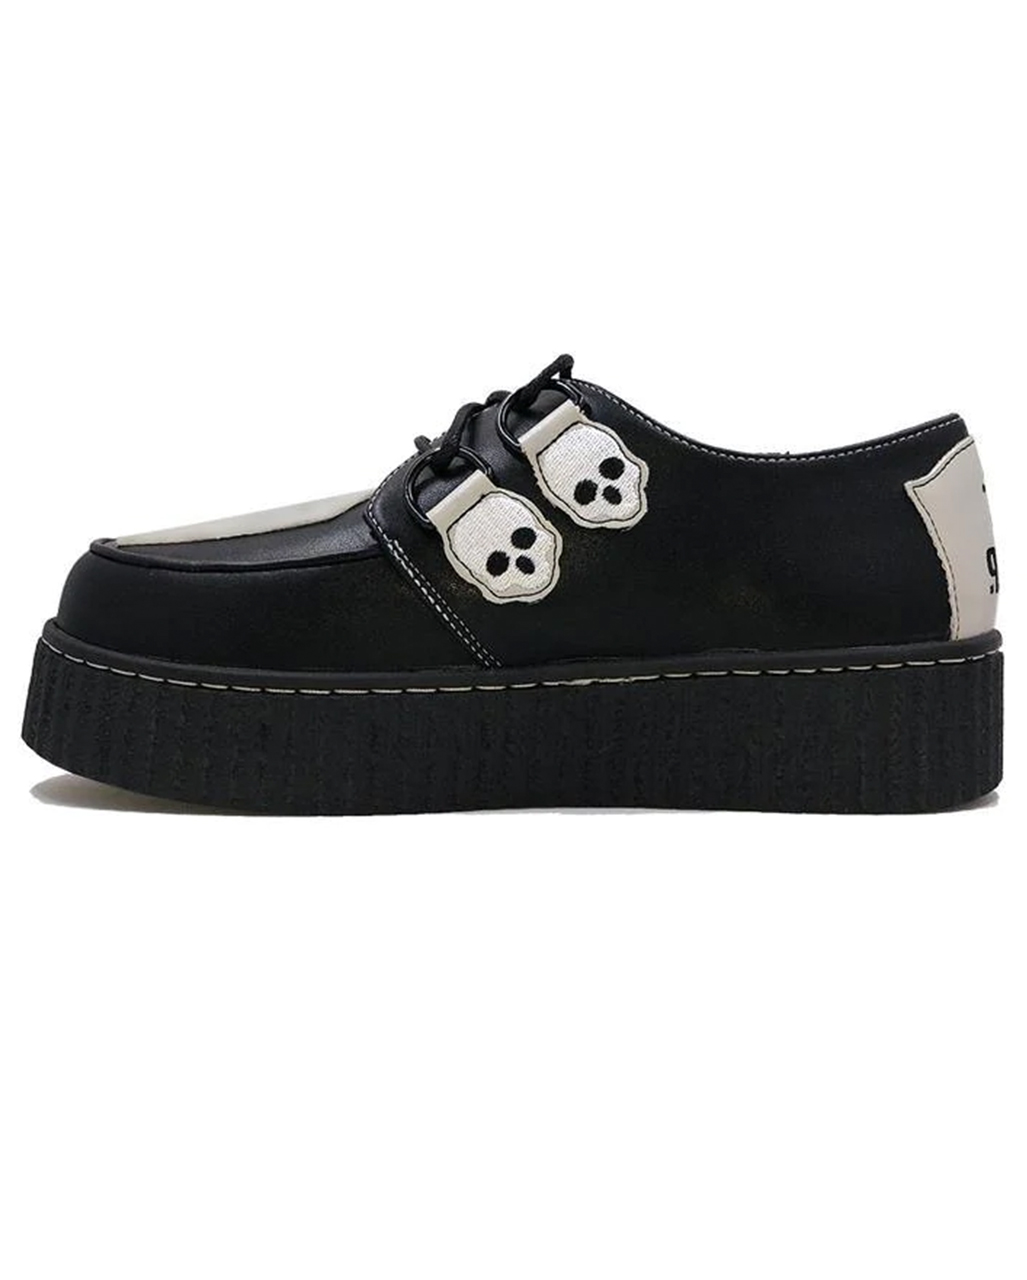 Coffin Black Creepers Shoes ★ for Gothic fans | Horror-Shop.com